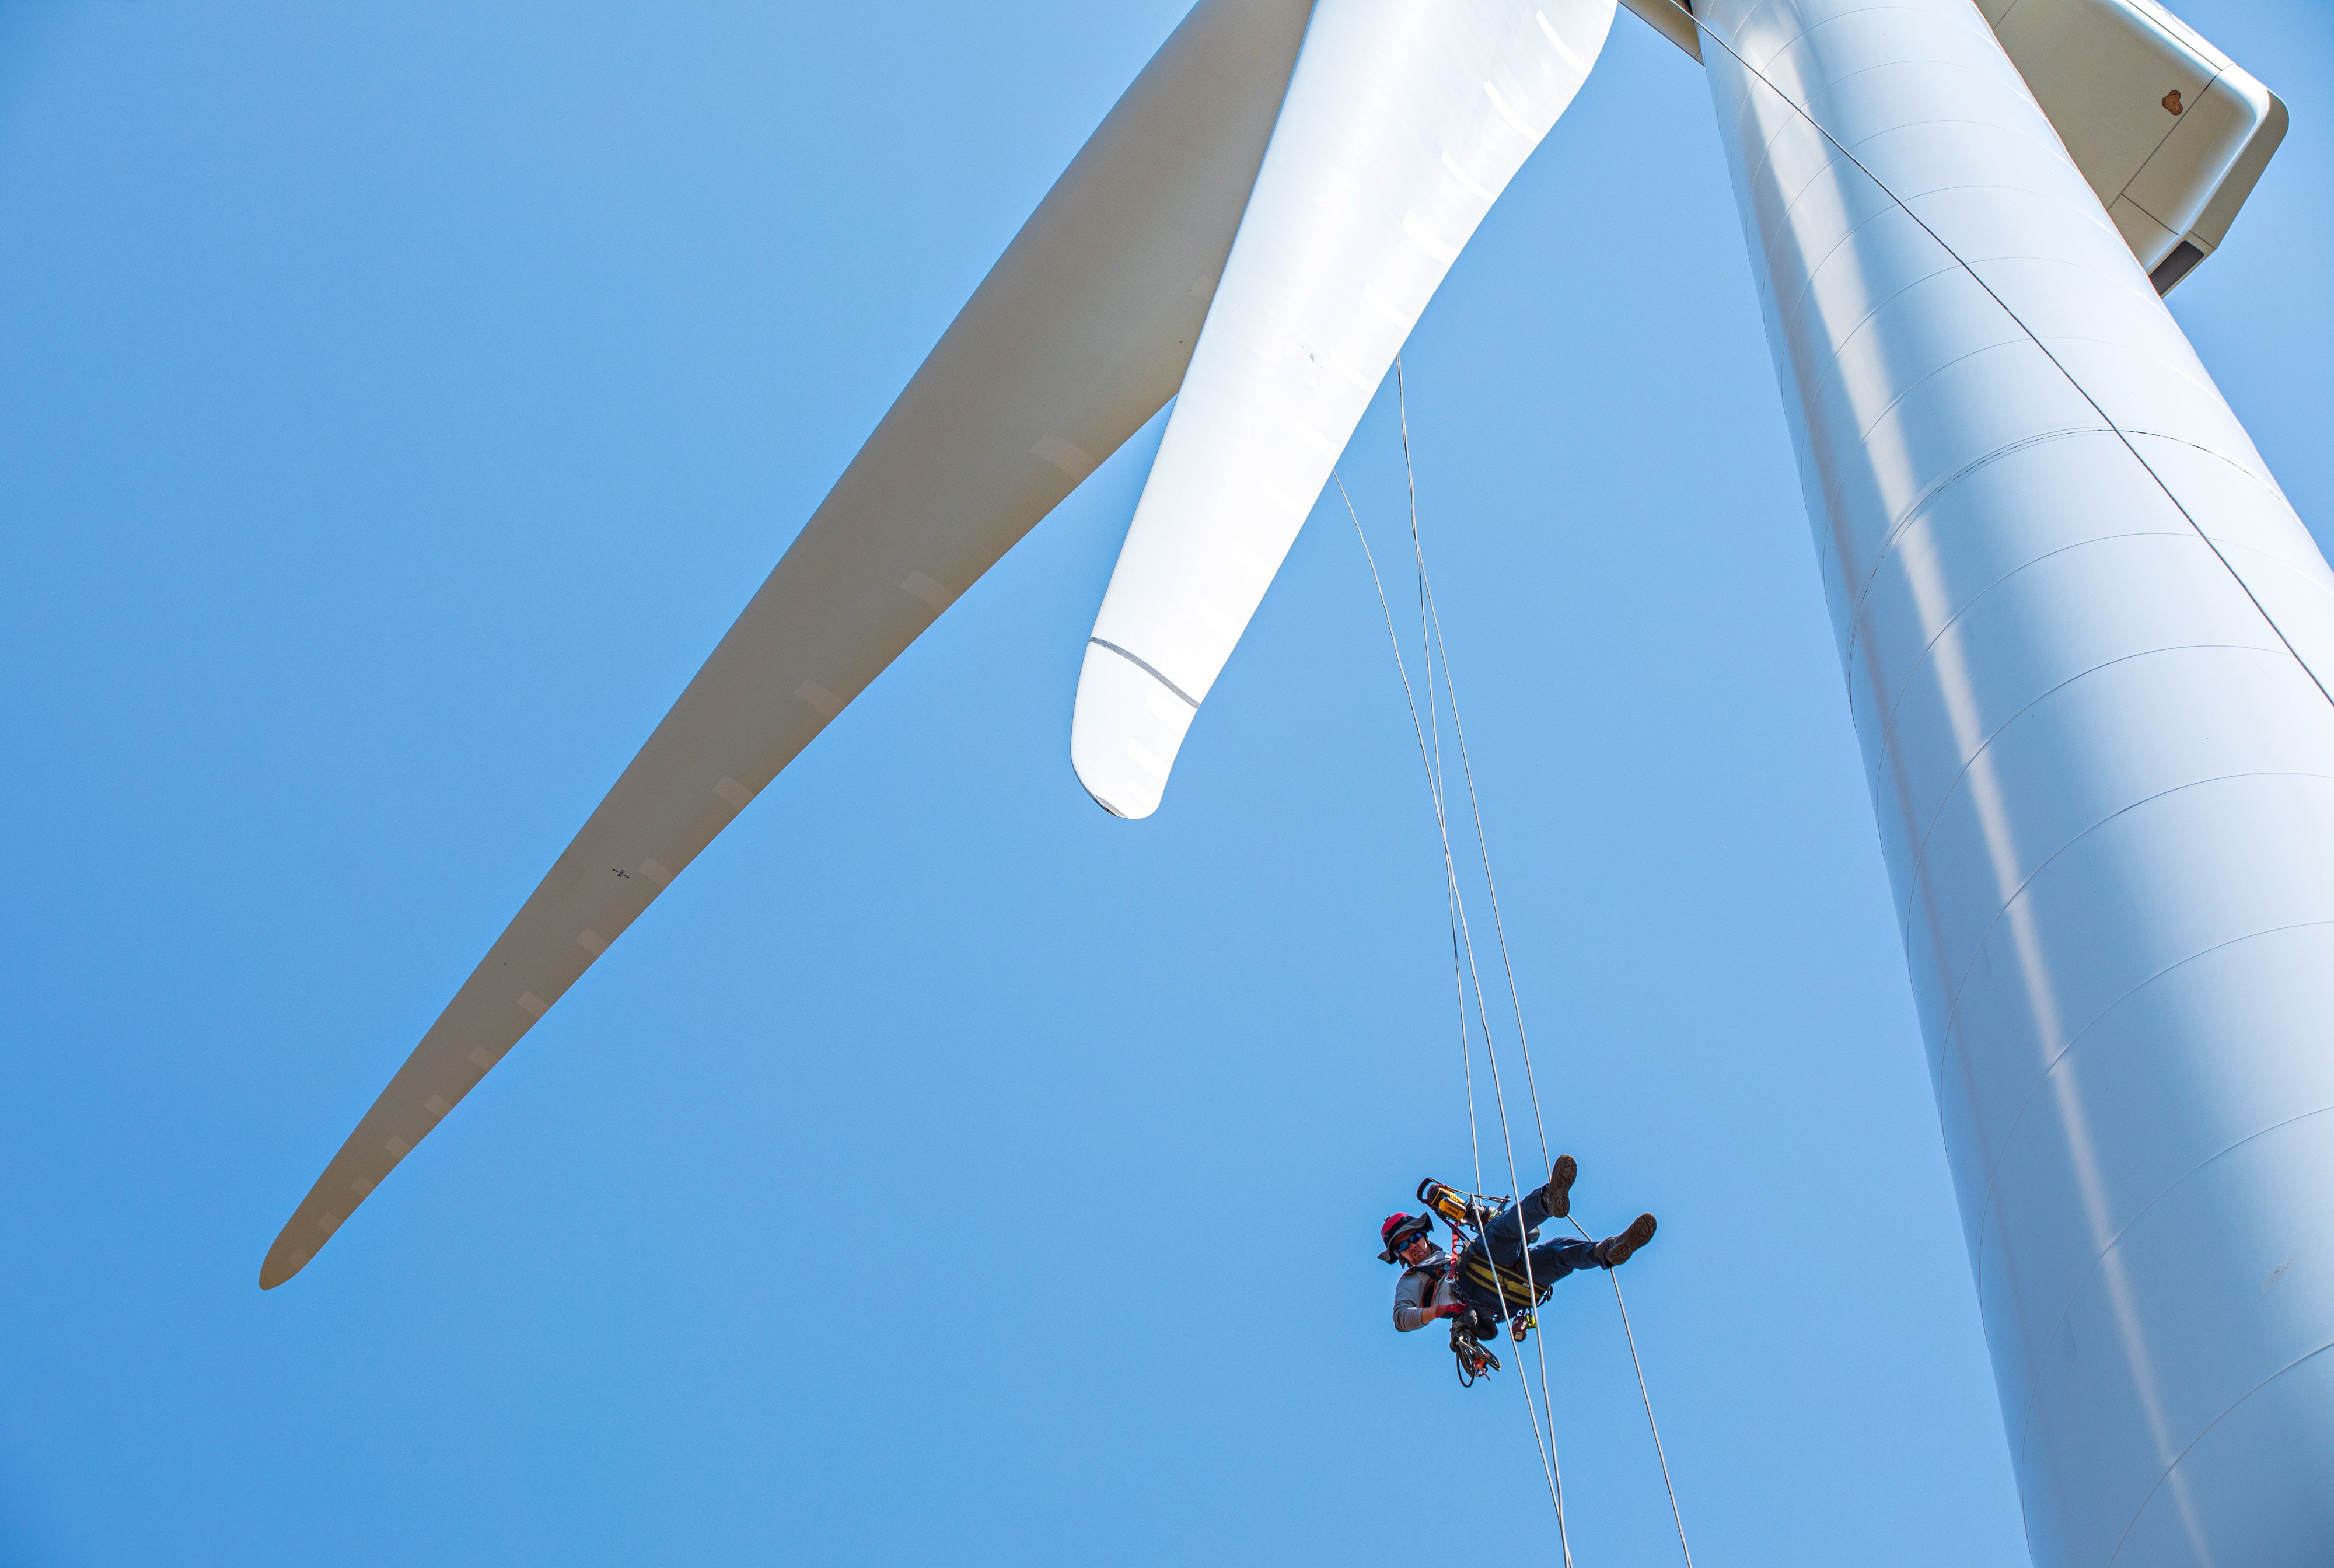 A worker in a harness, hard hat, and other protective gear hangs by a rope from the top of a wind turbine.